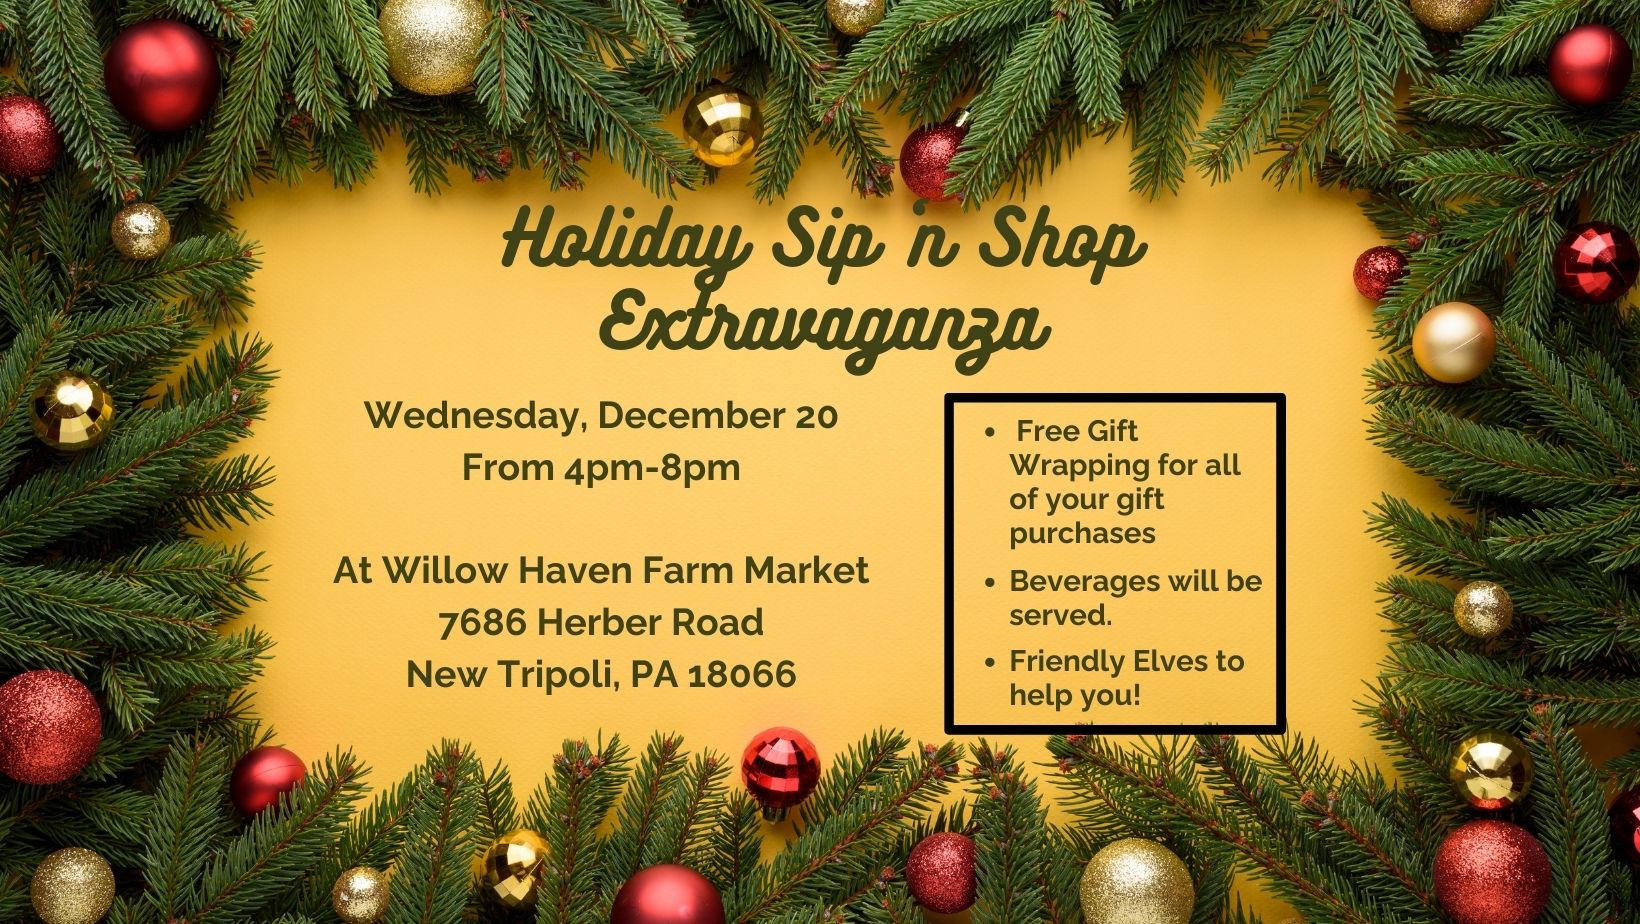 shop at the farm store this Wednesday